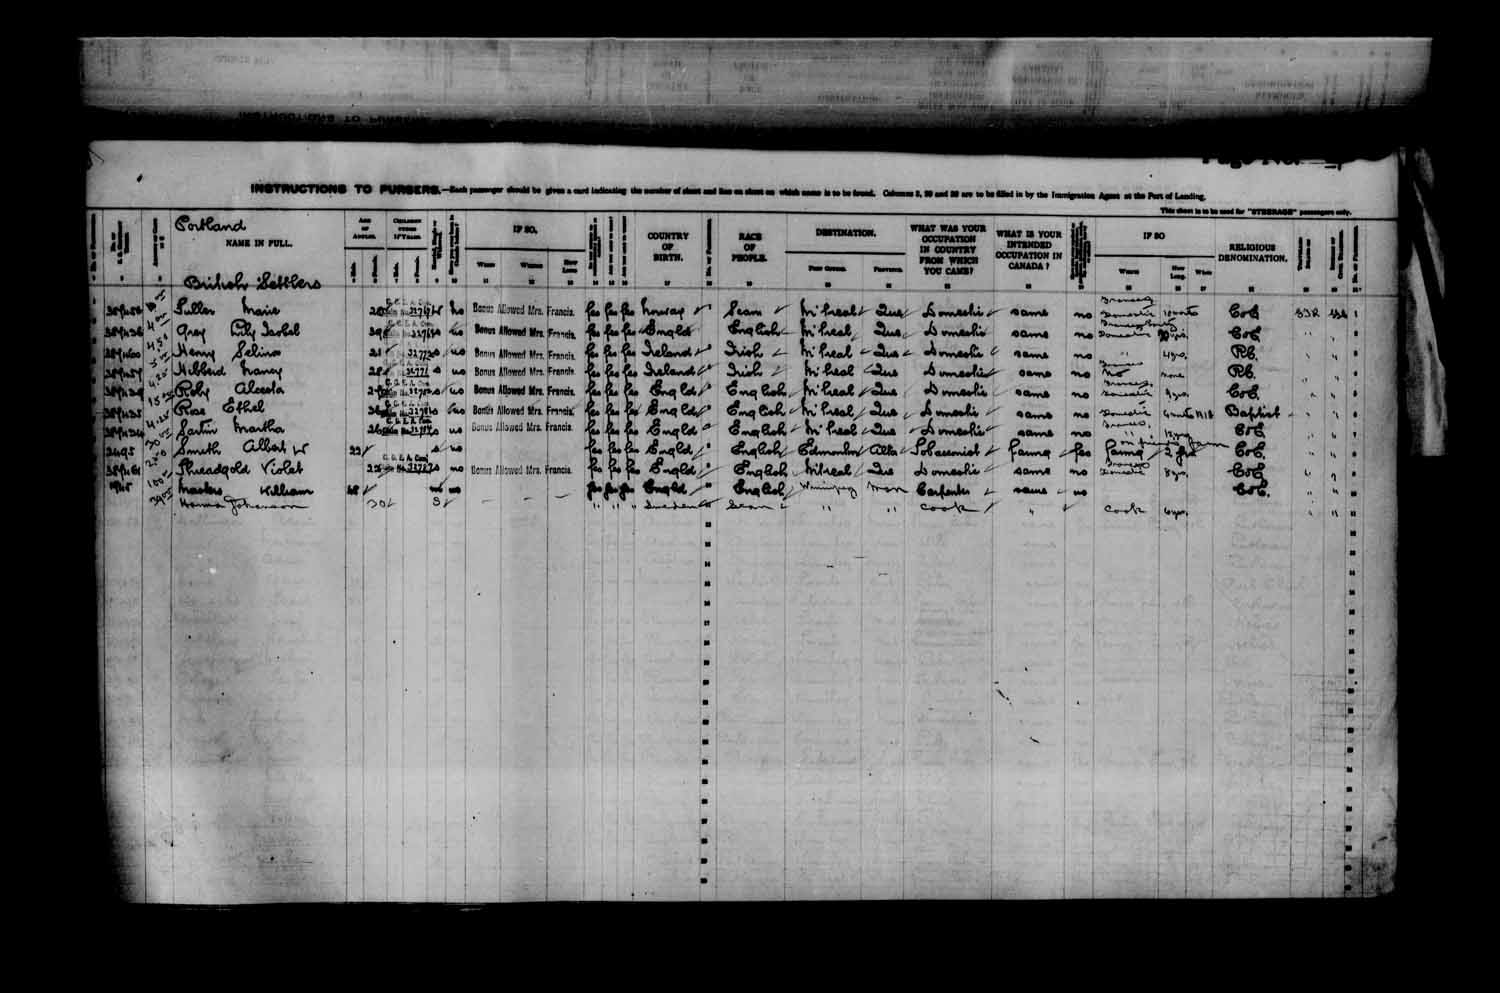 Digitized page of Passenger Lists for Image No.: e003622992